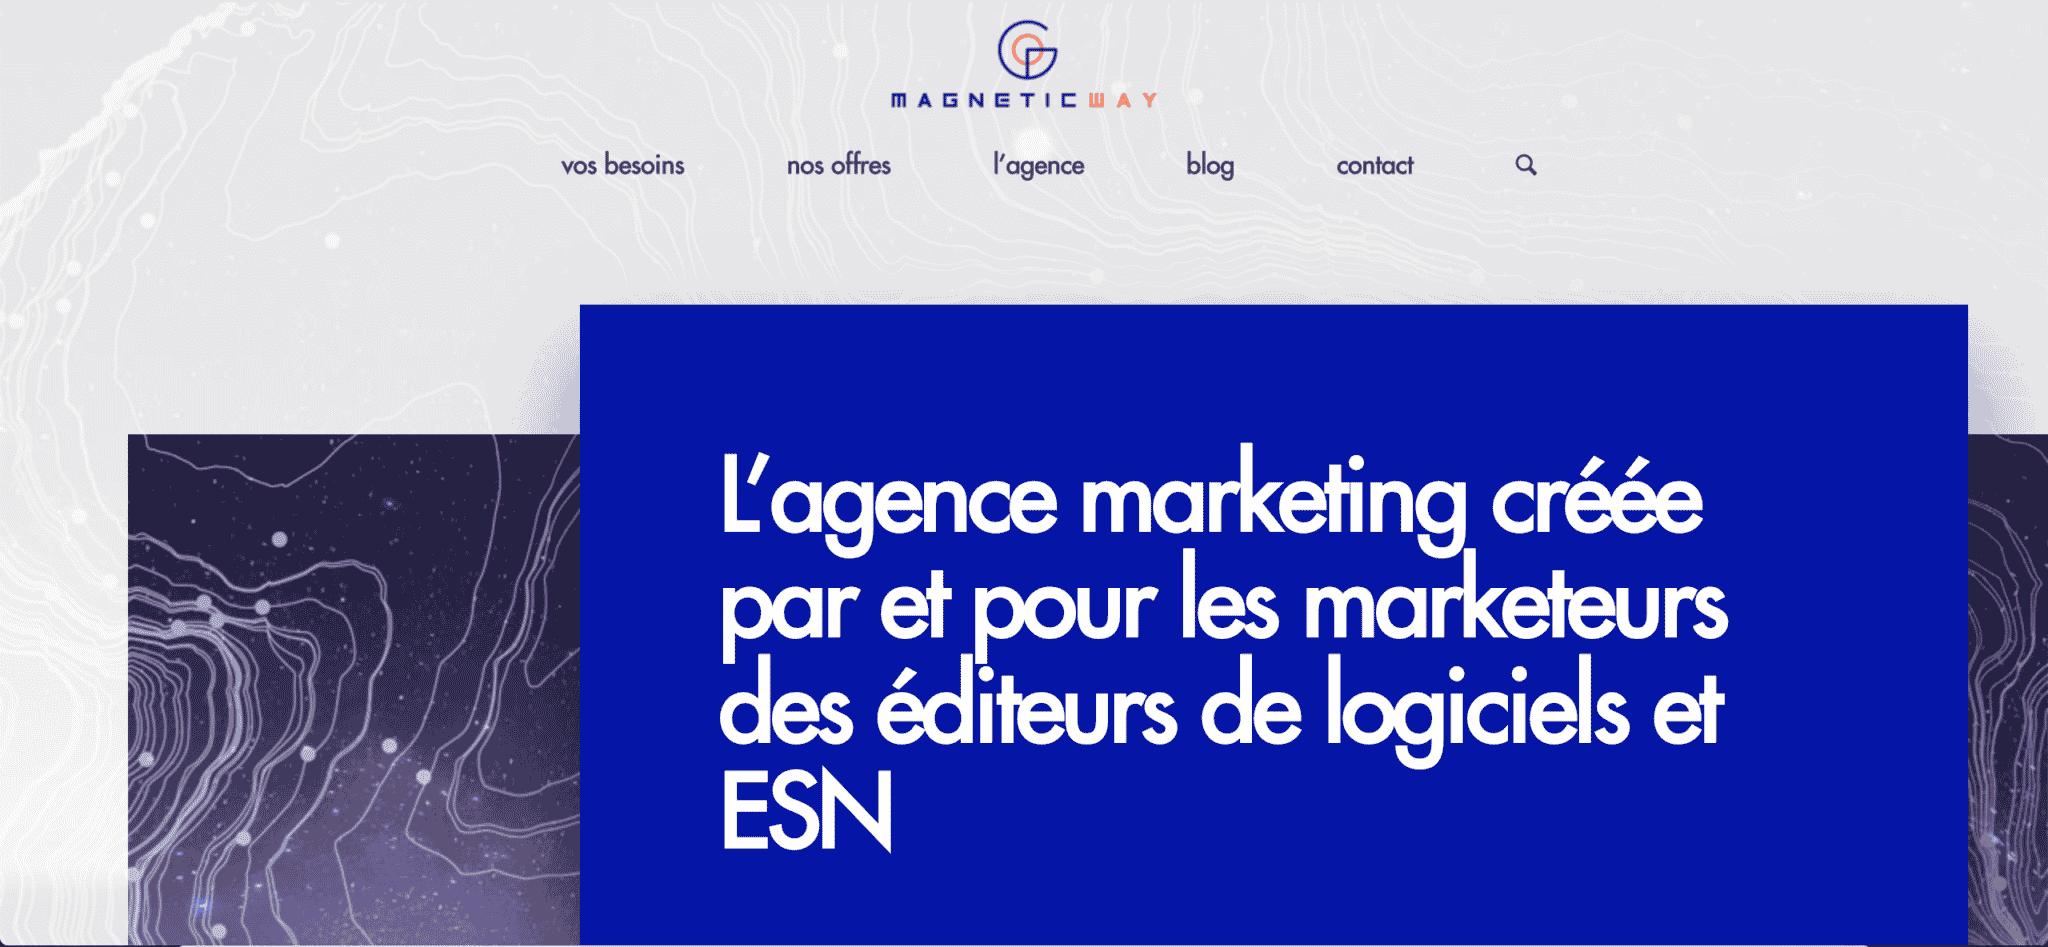 comparatif-agences-marketing-operationnel-magnetic-way